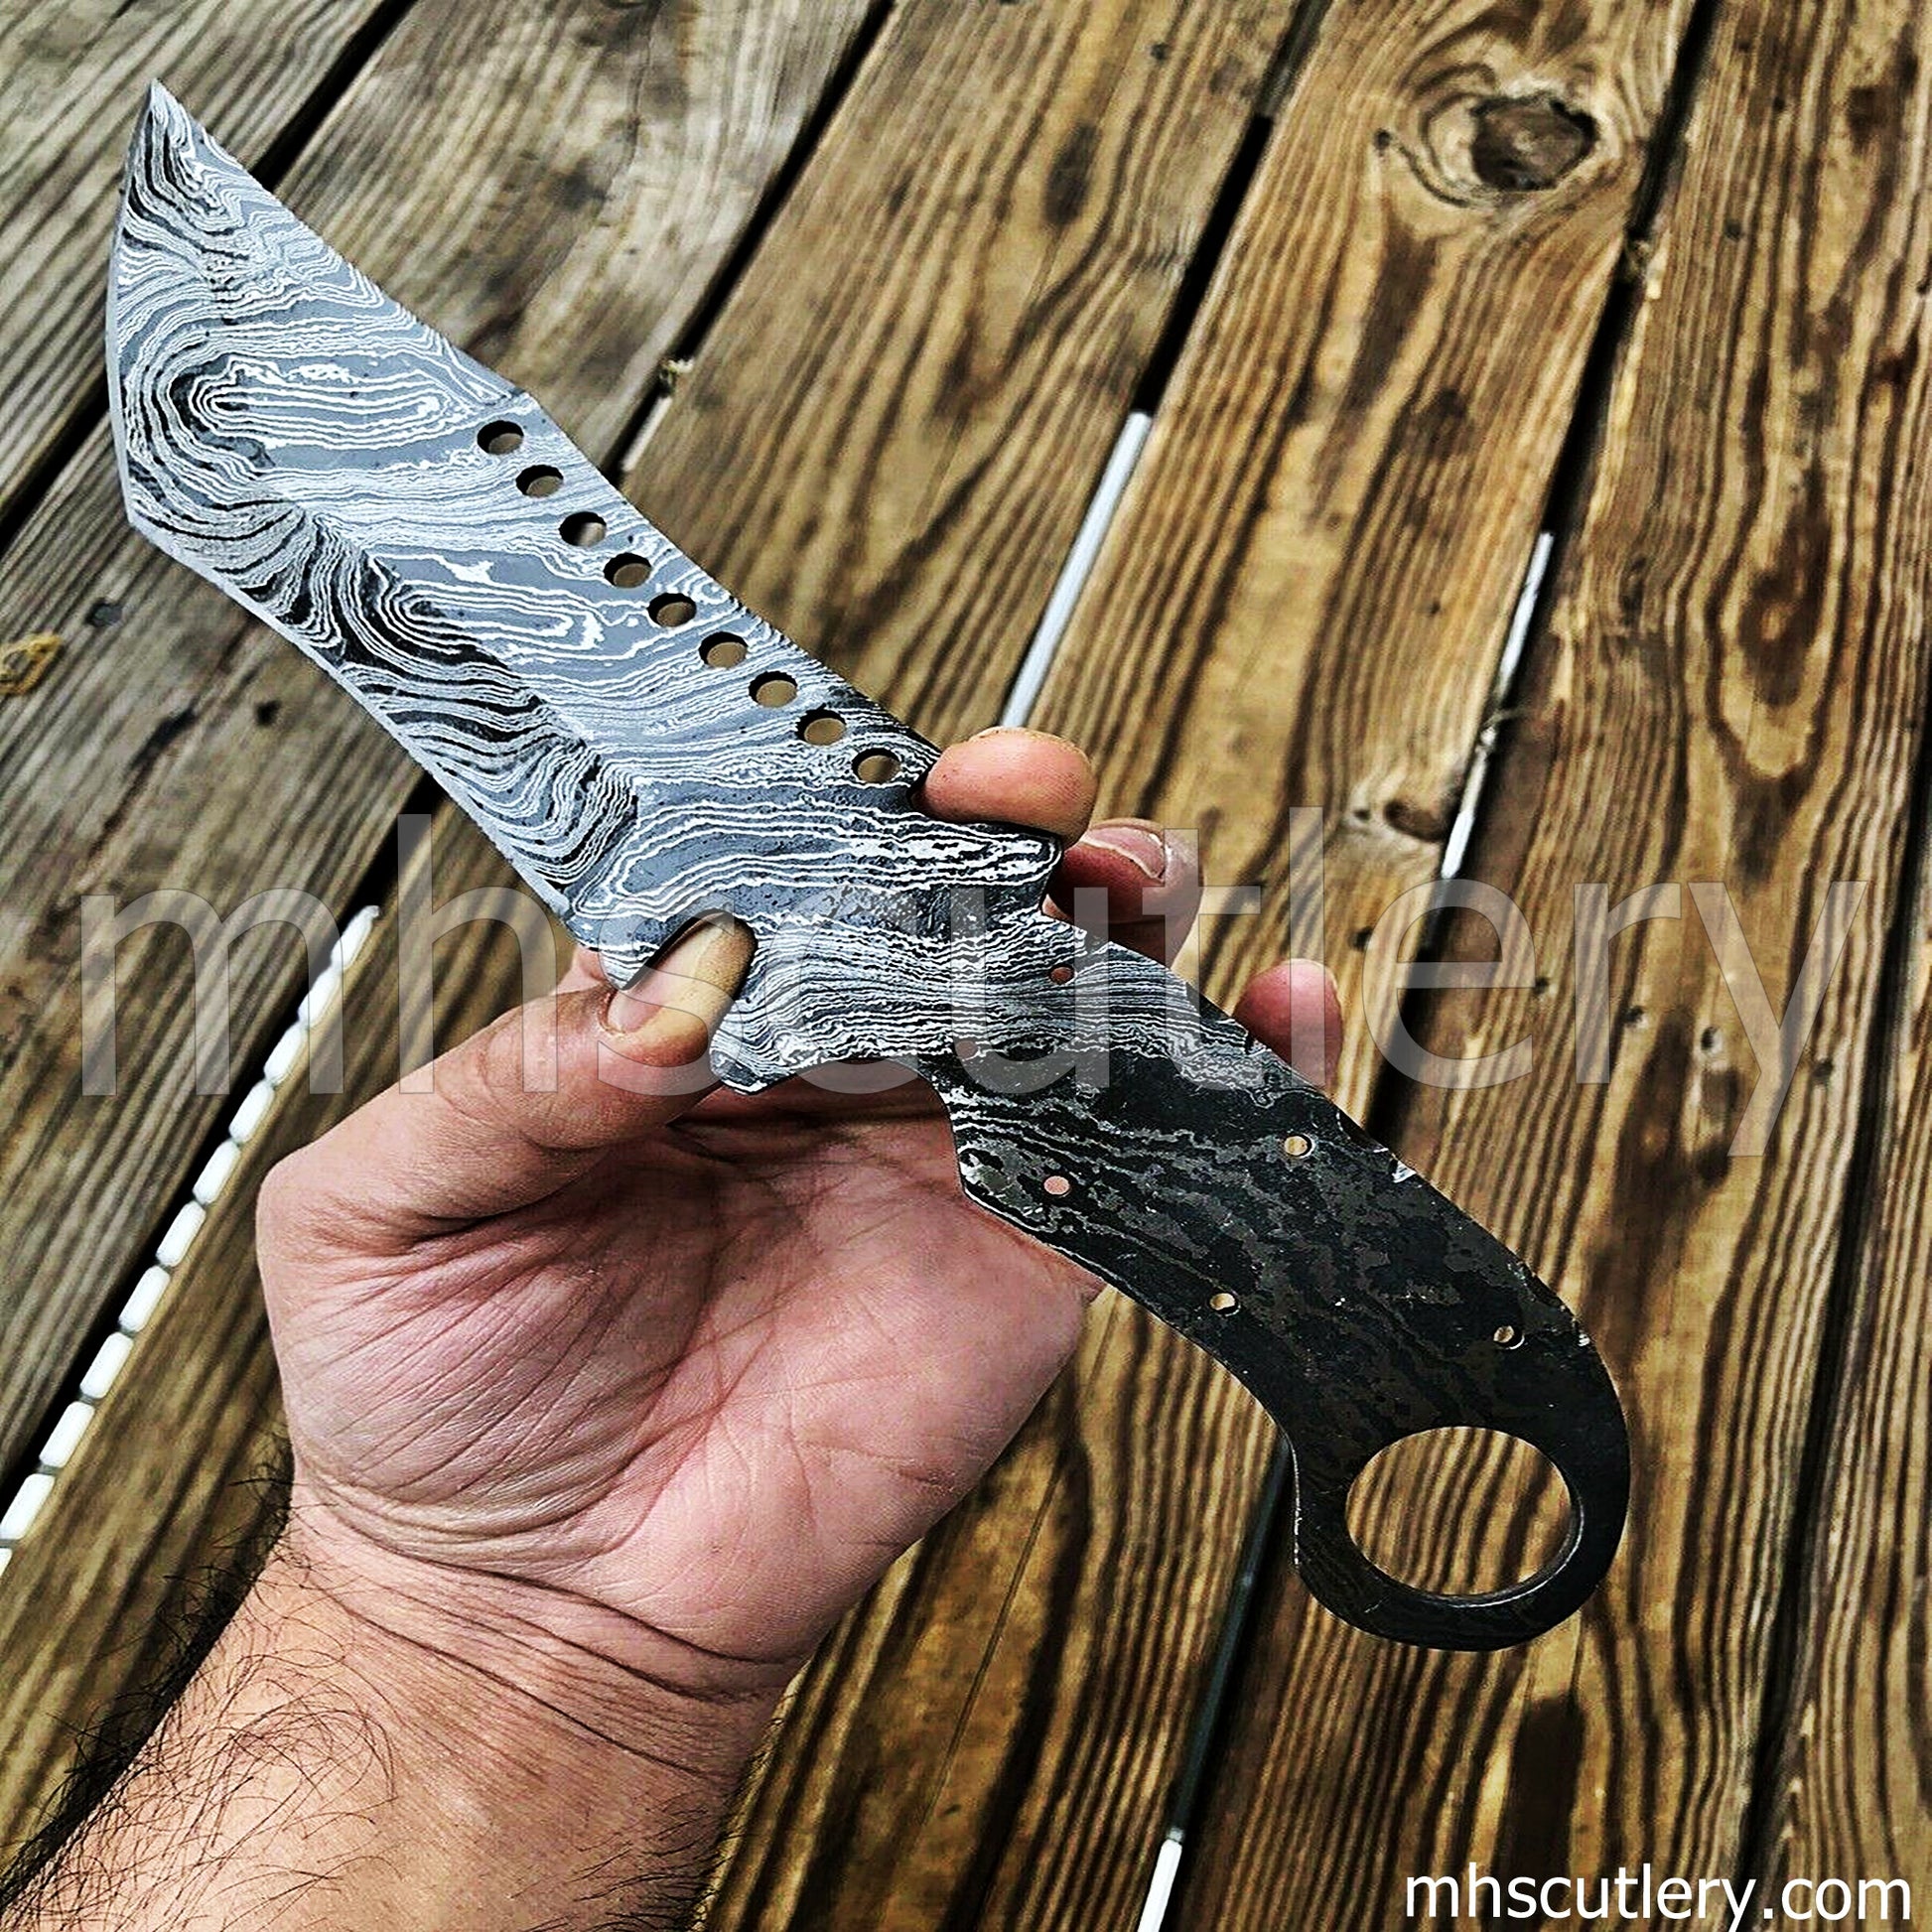 Damascus Steel Tactical Tracker Knife Blank Blade For Knife Makers | mhscutlery